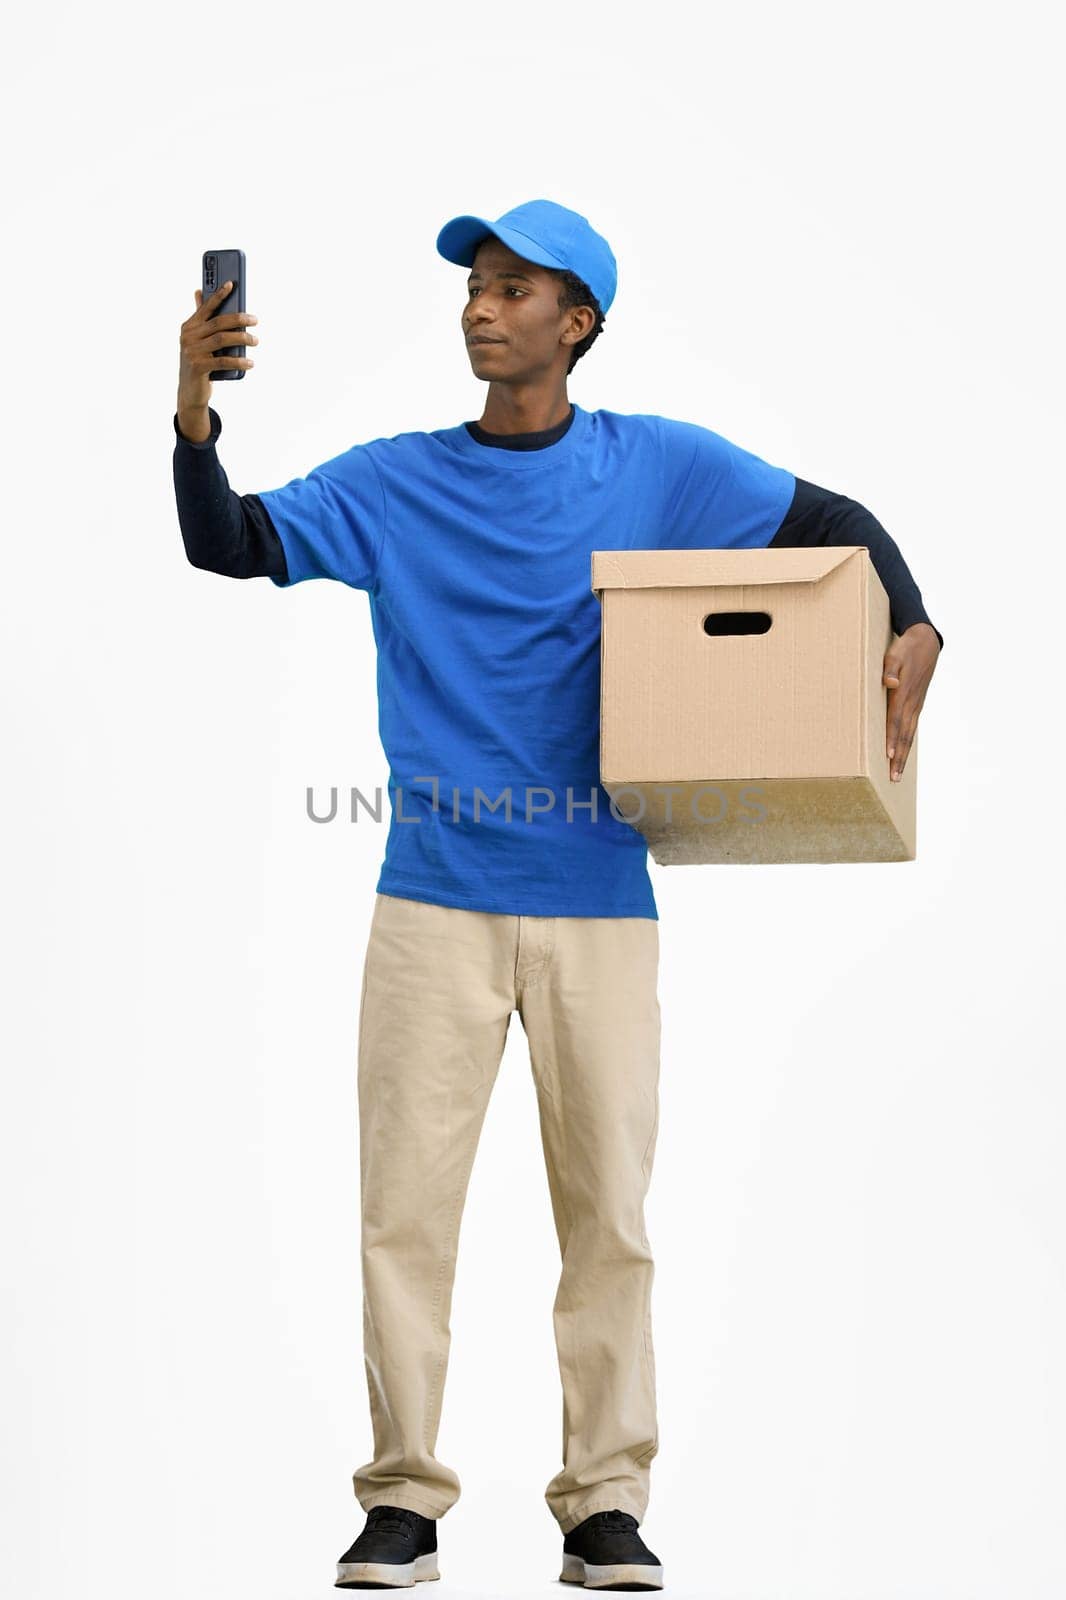 The deliveryman, in full height, on a white background, with a box, talking on the phone by Prosto